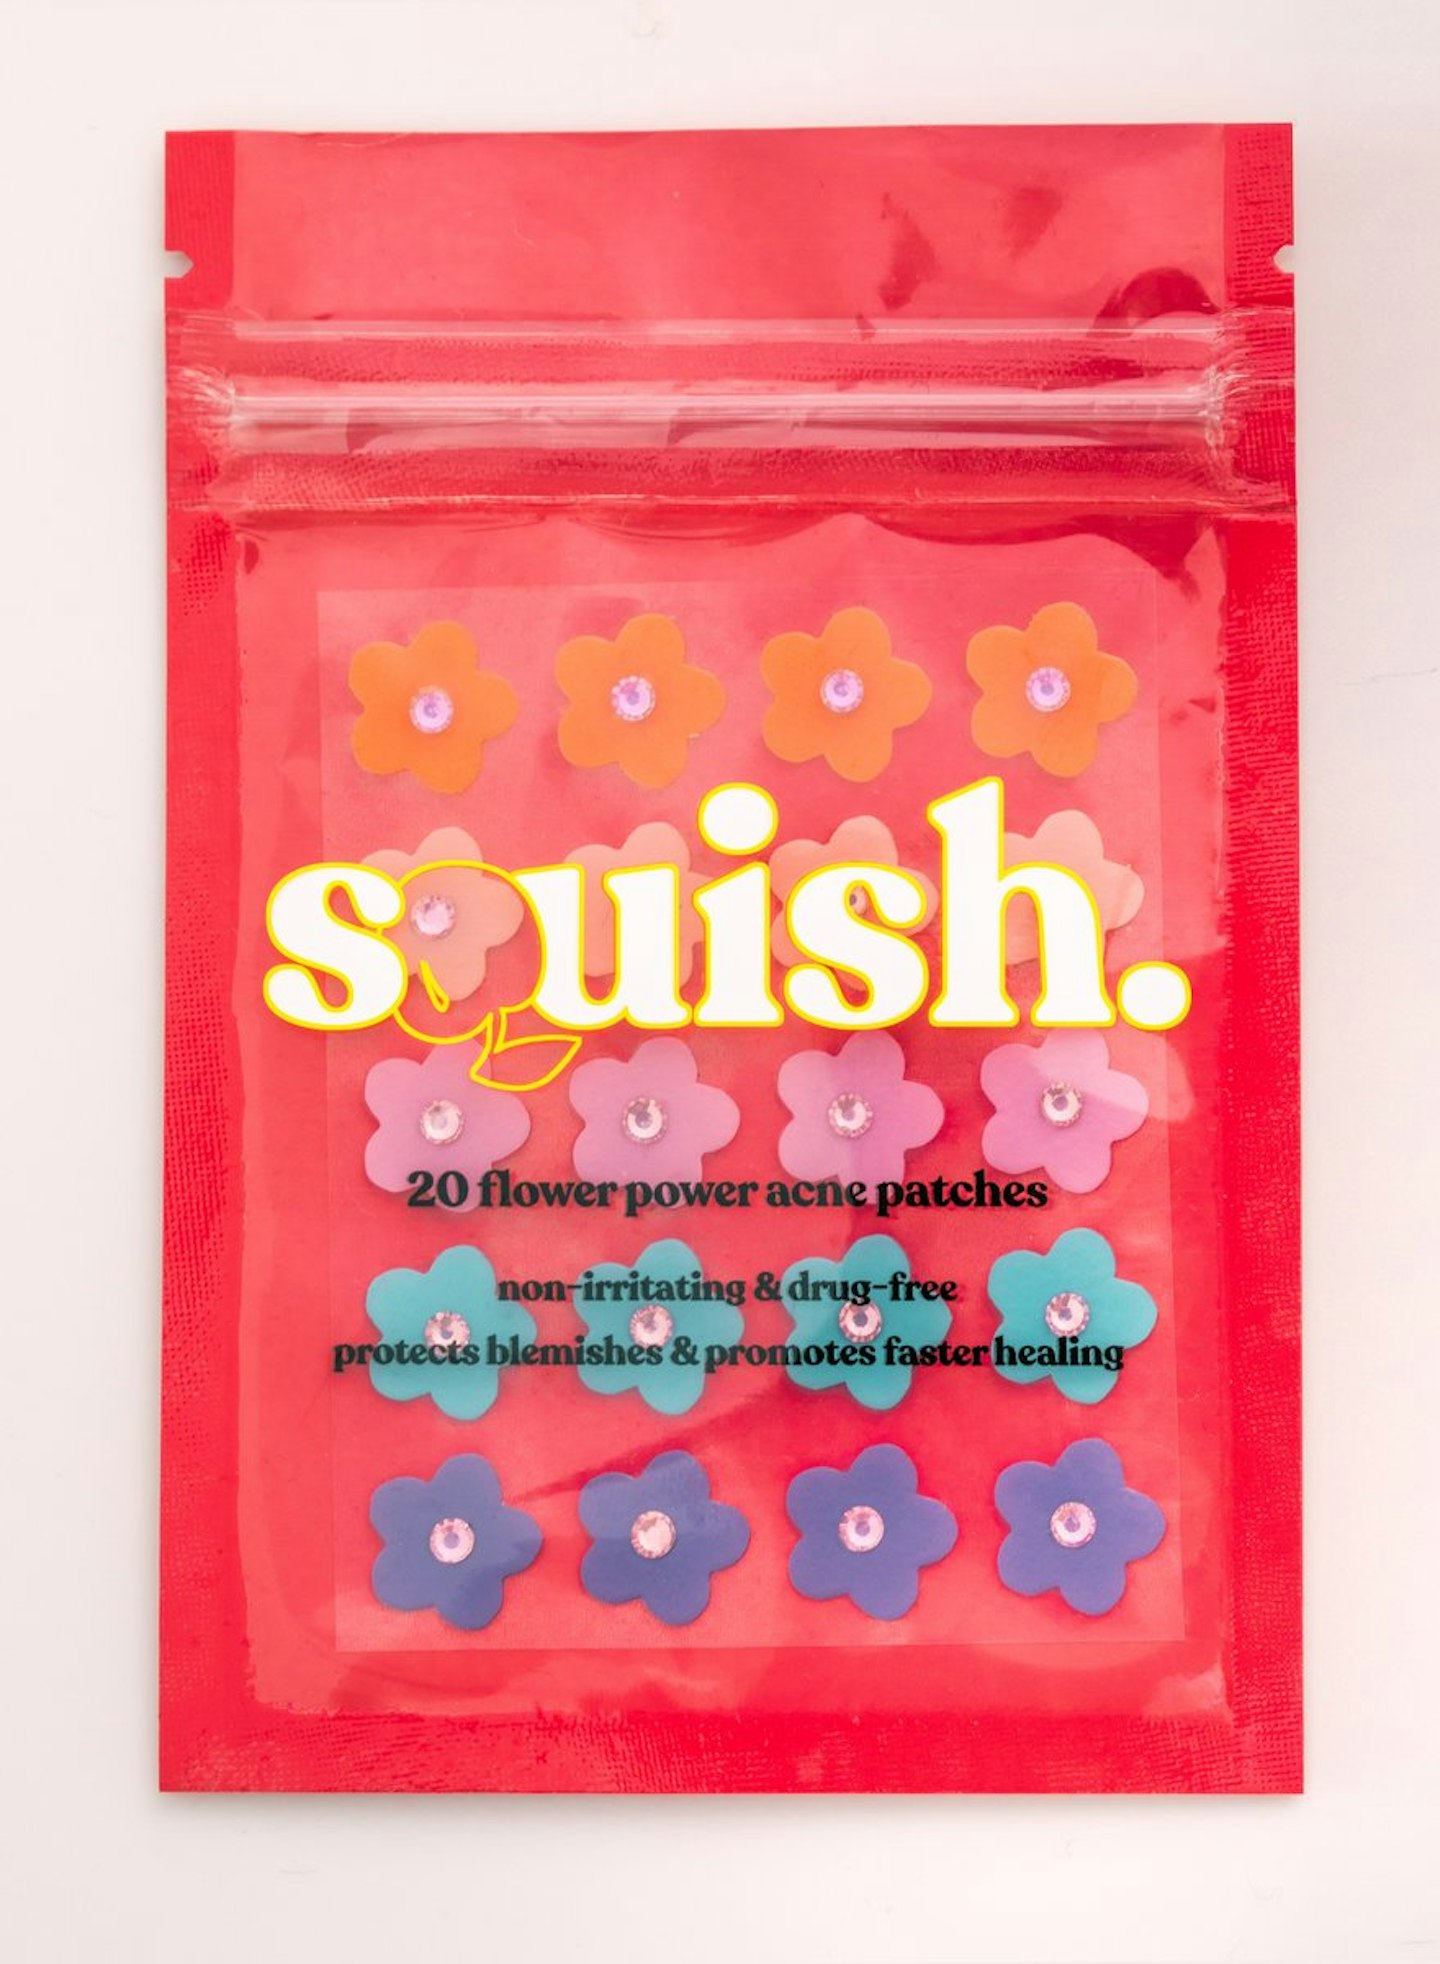 Squish Flower Power Acne Patches, £11.37